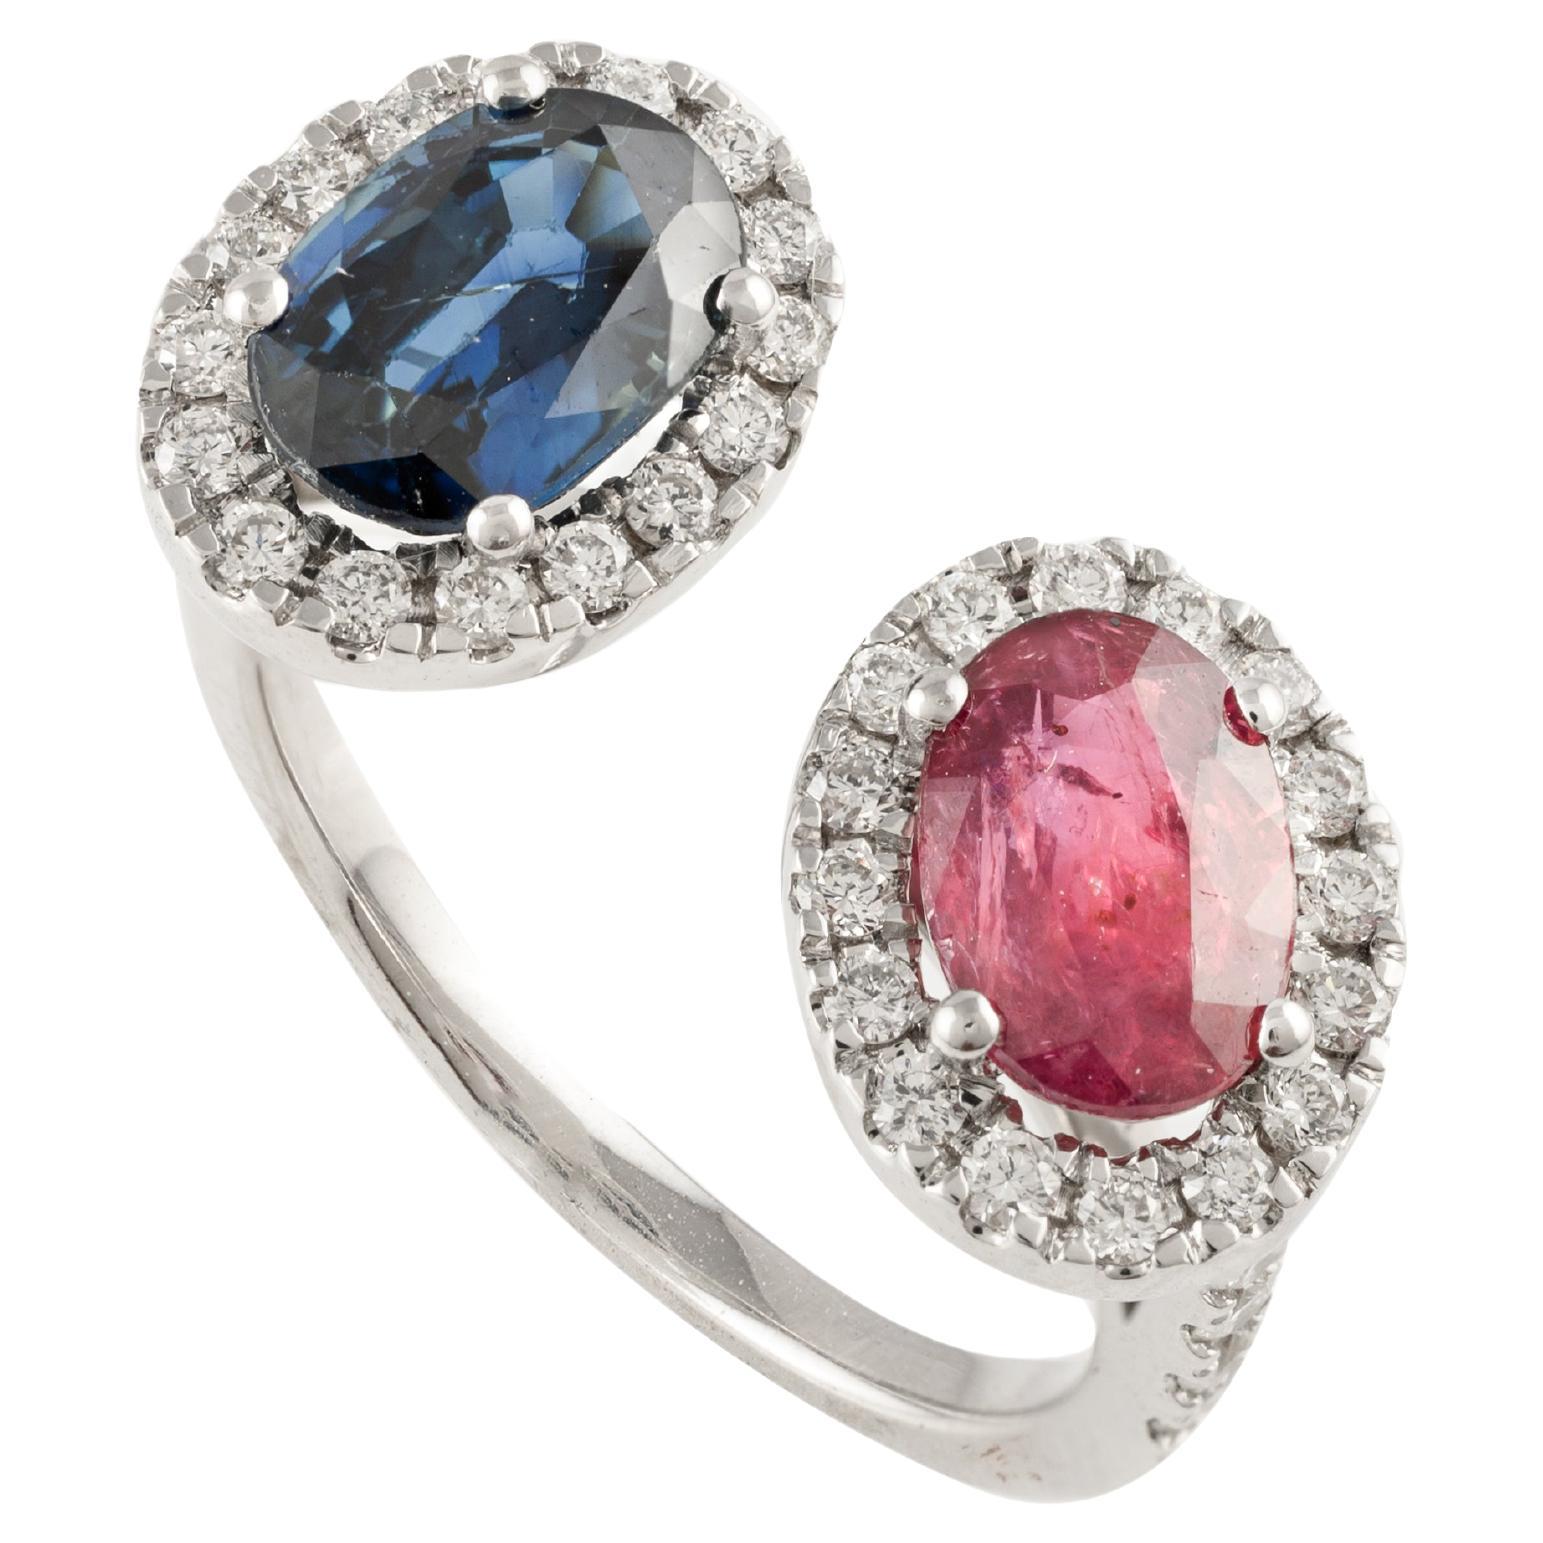 Certified Diamond, Ruby and Blue Sapphire Toi et Moi Ring 18k Solid White Gold